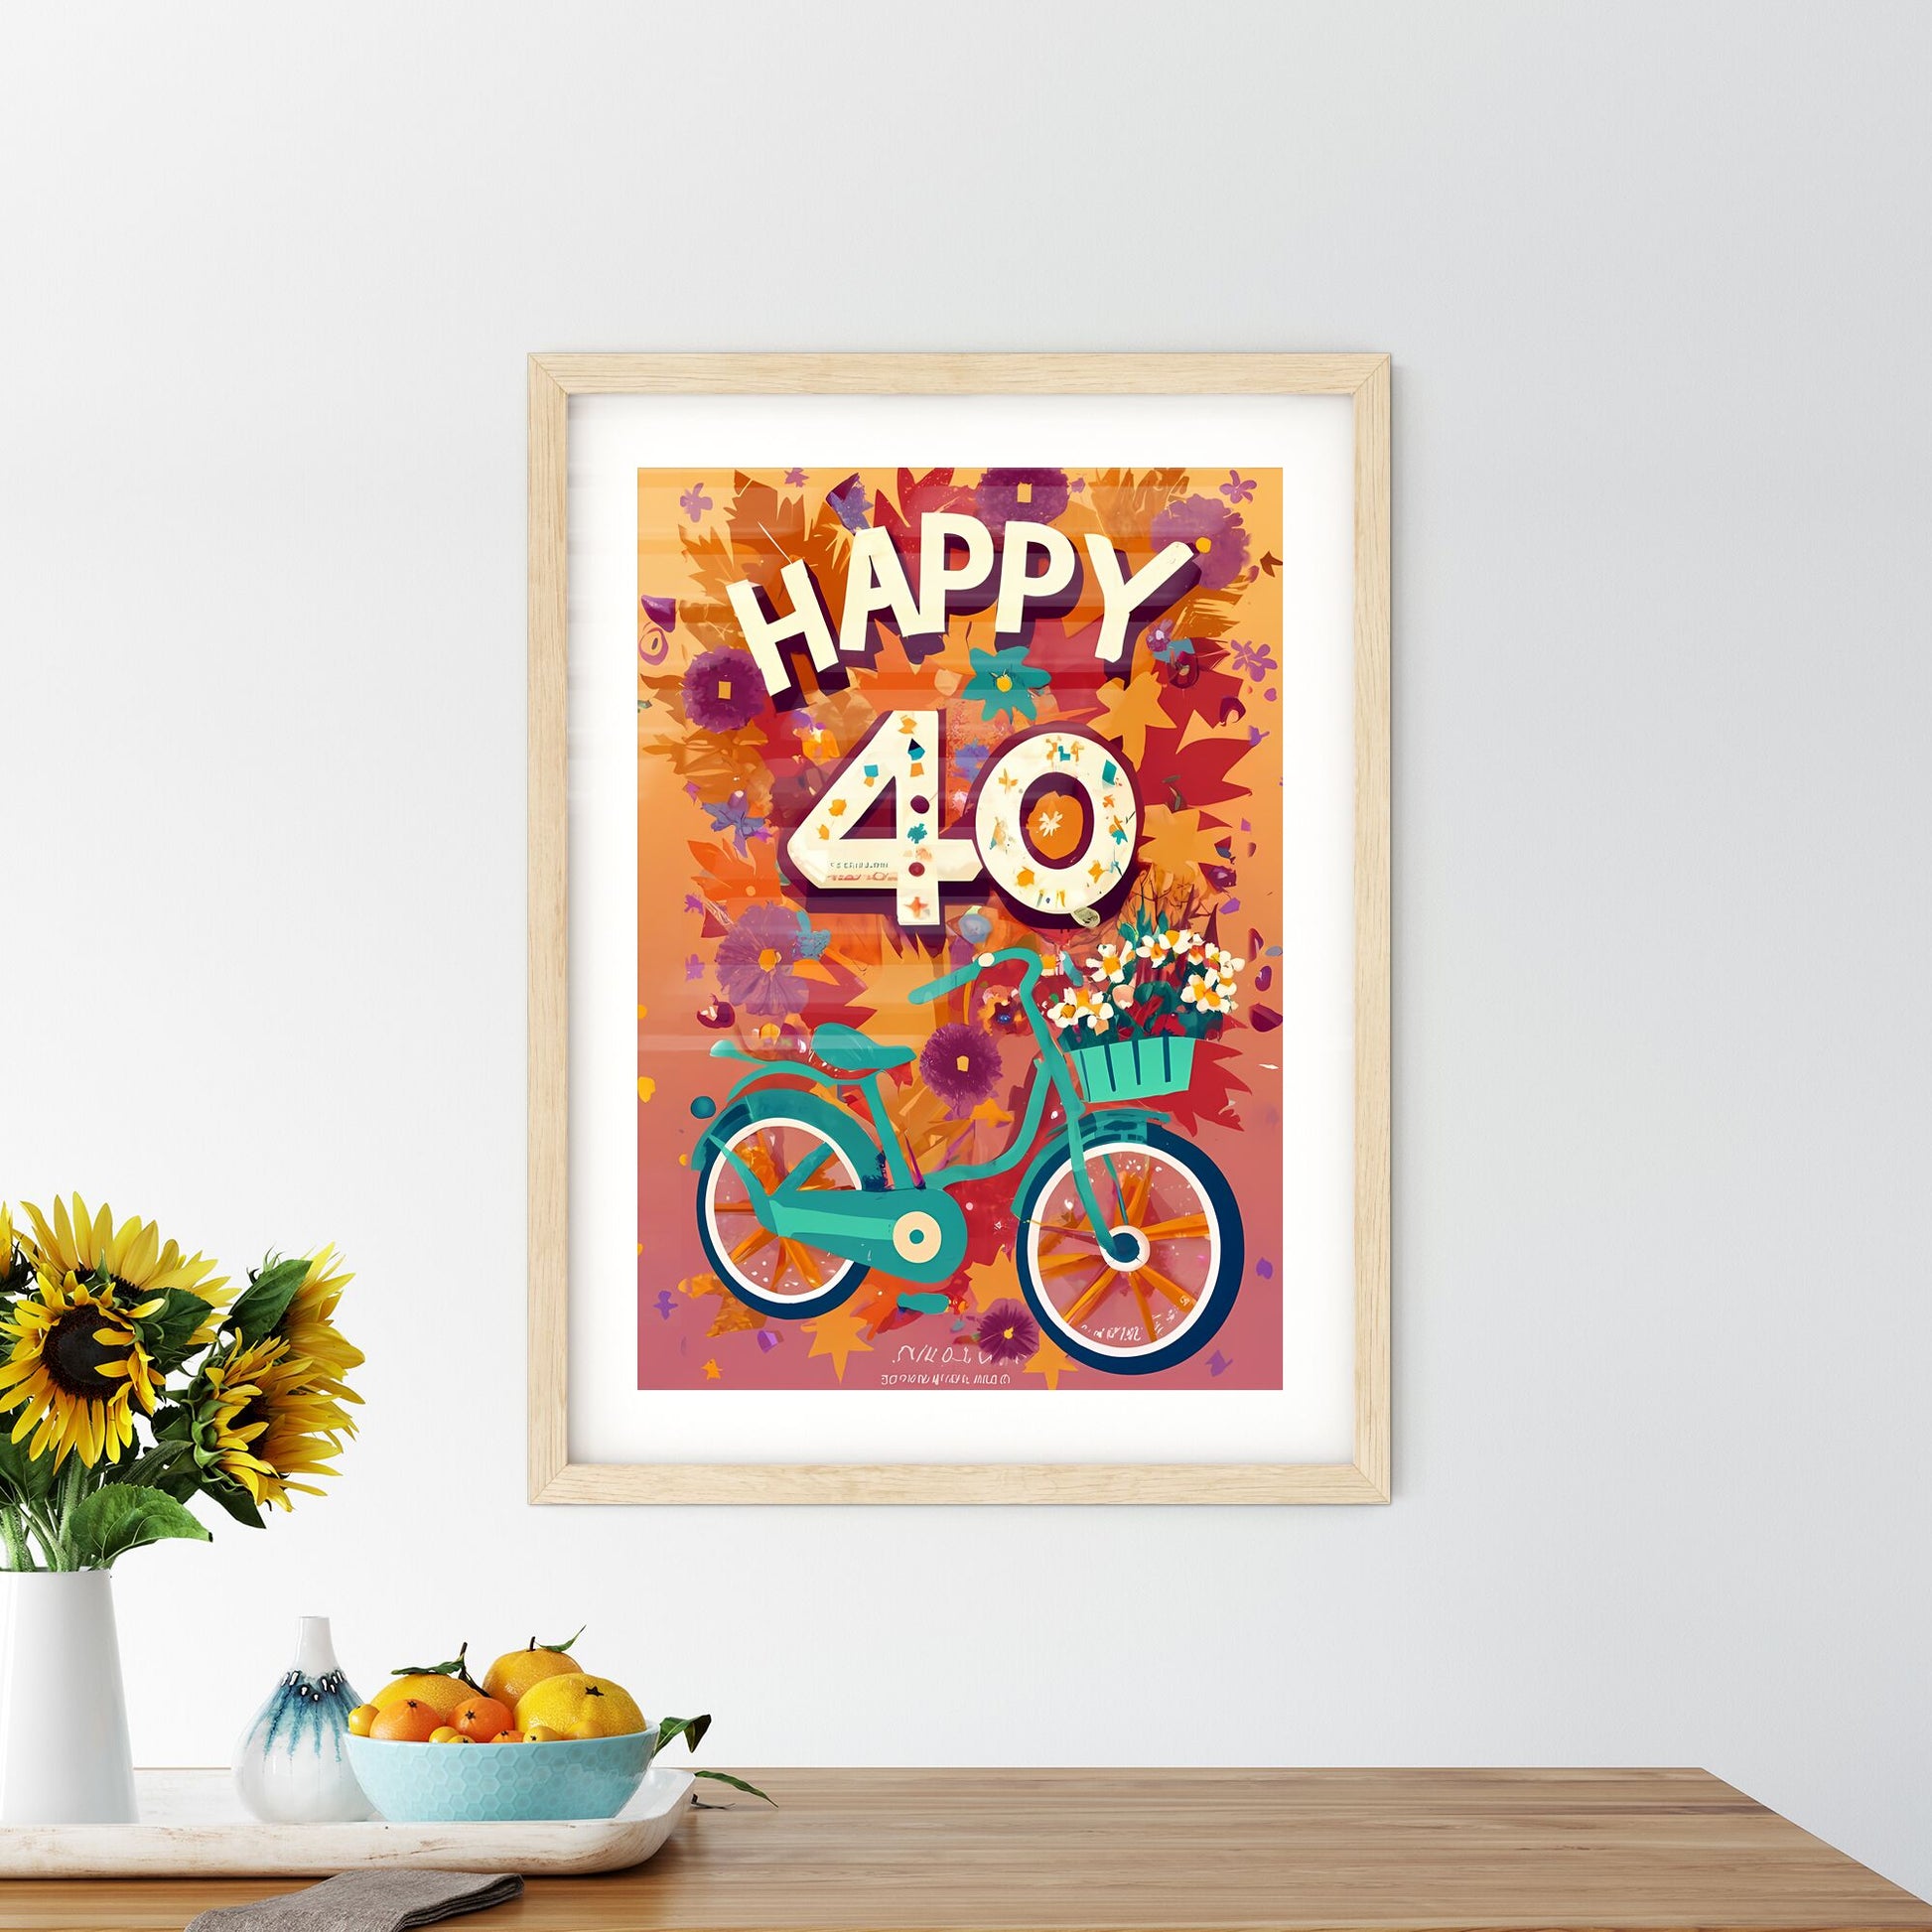 Happy 40Th - A Bicycle With Flowers And Text Default Title